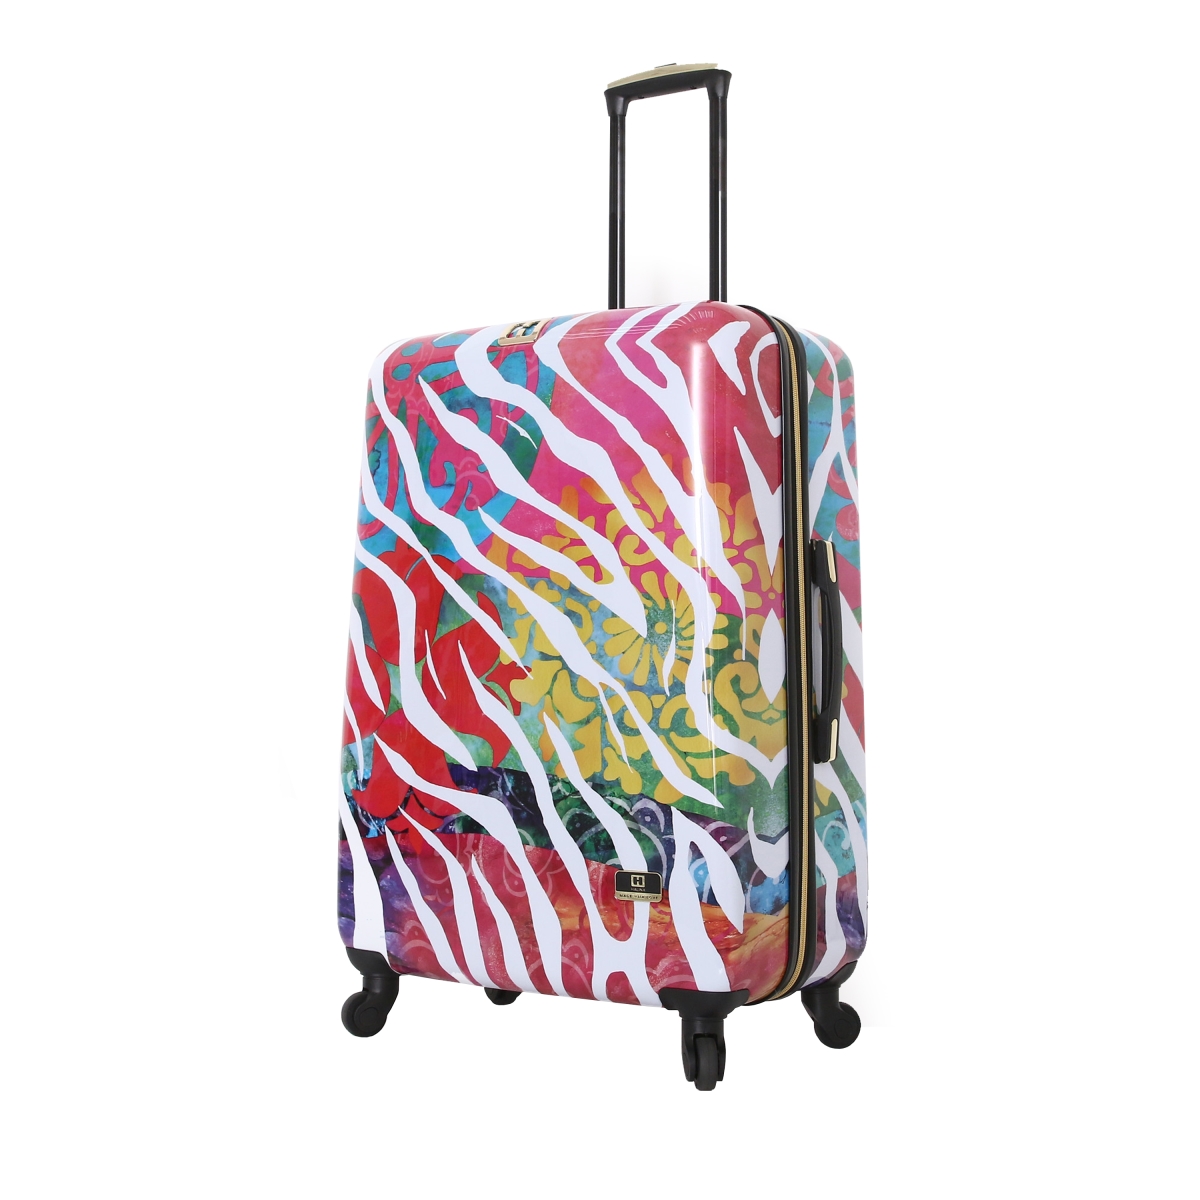 H1000-28-bsrnn 28 In. Bee Sturgis Serengeti Reflections Carry On Luggage, Multicolor